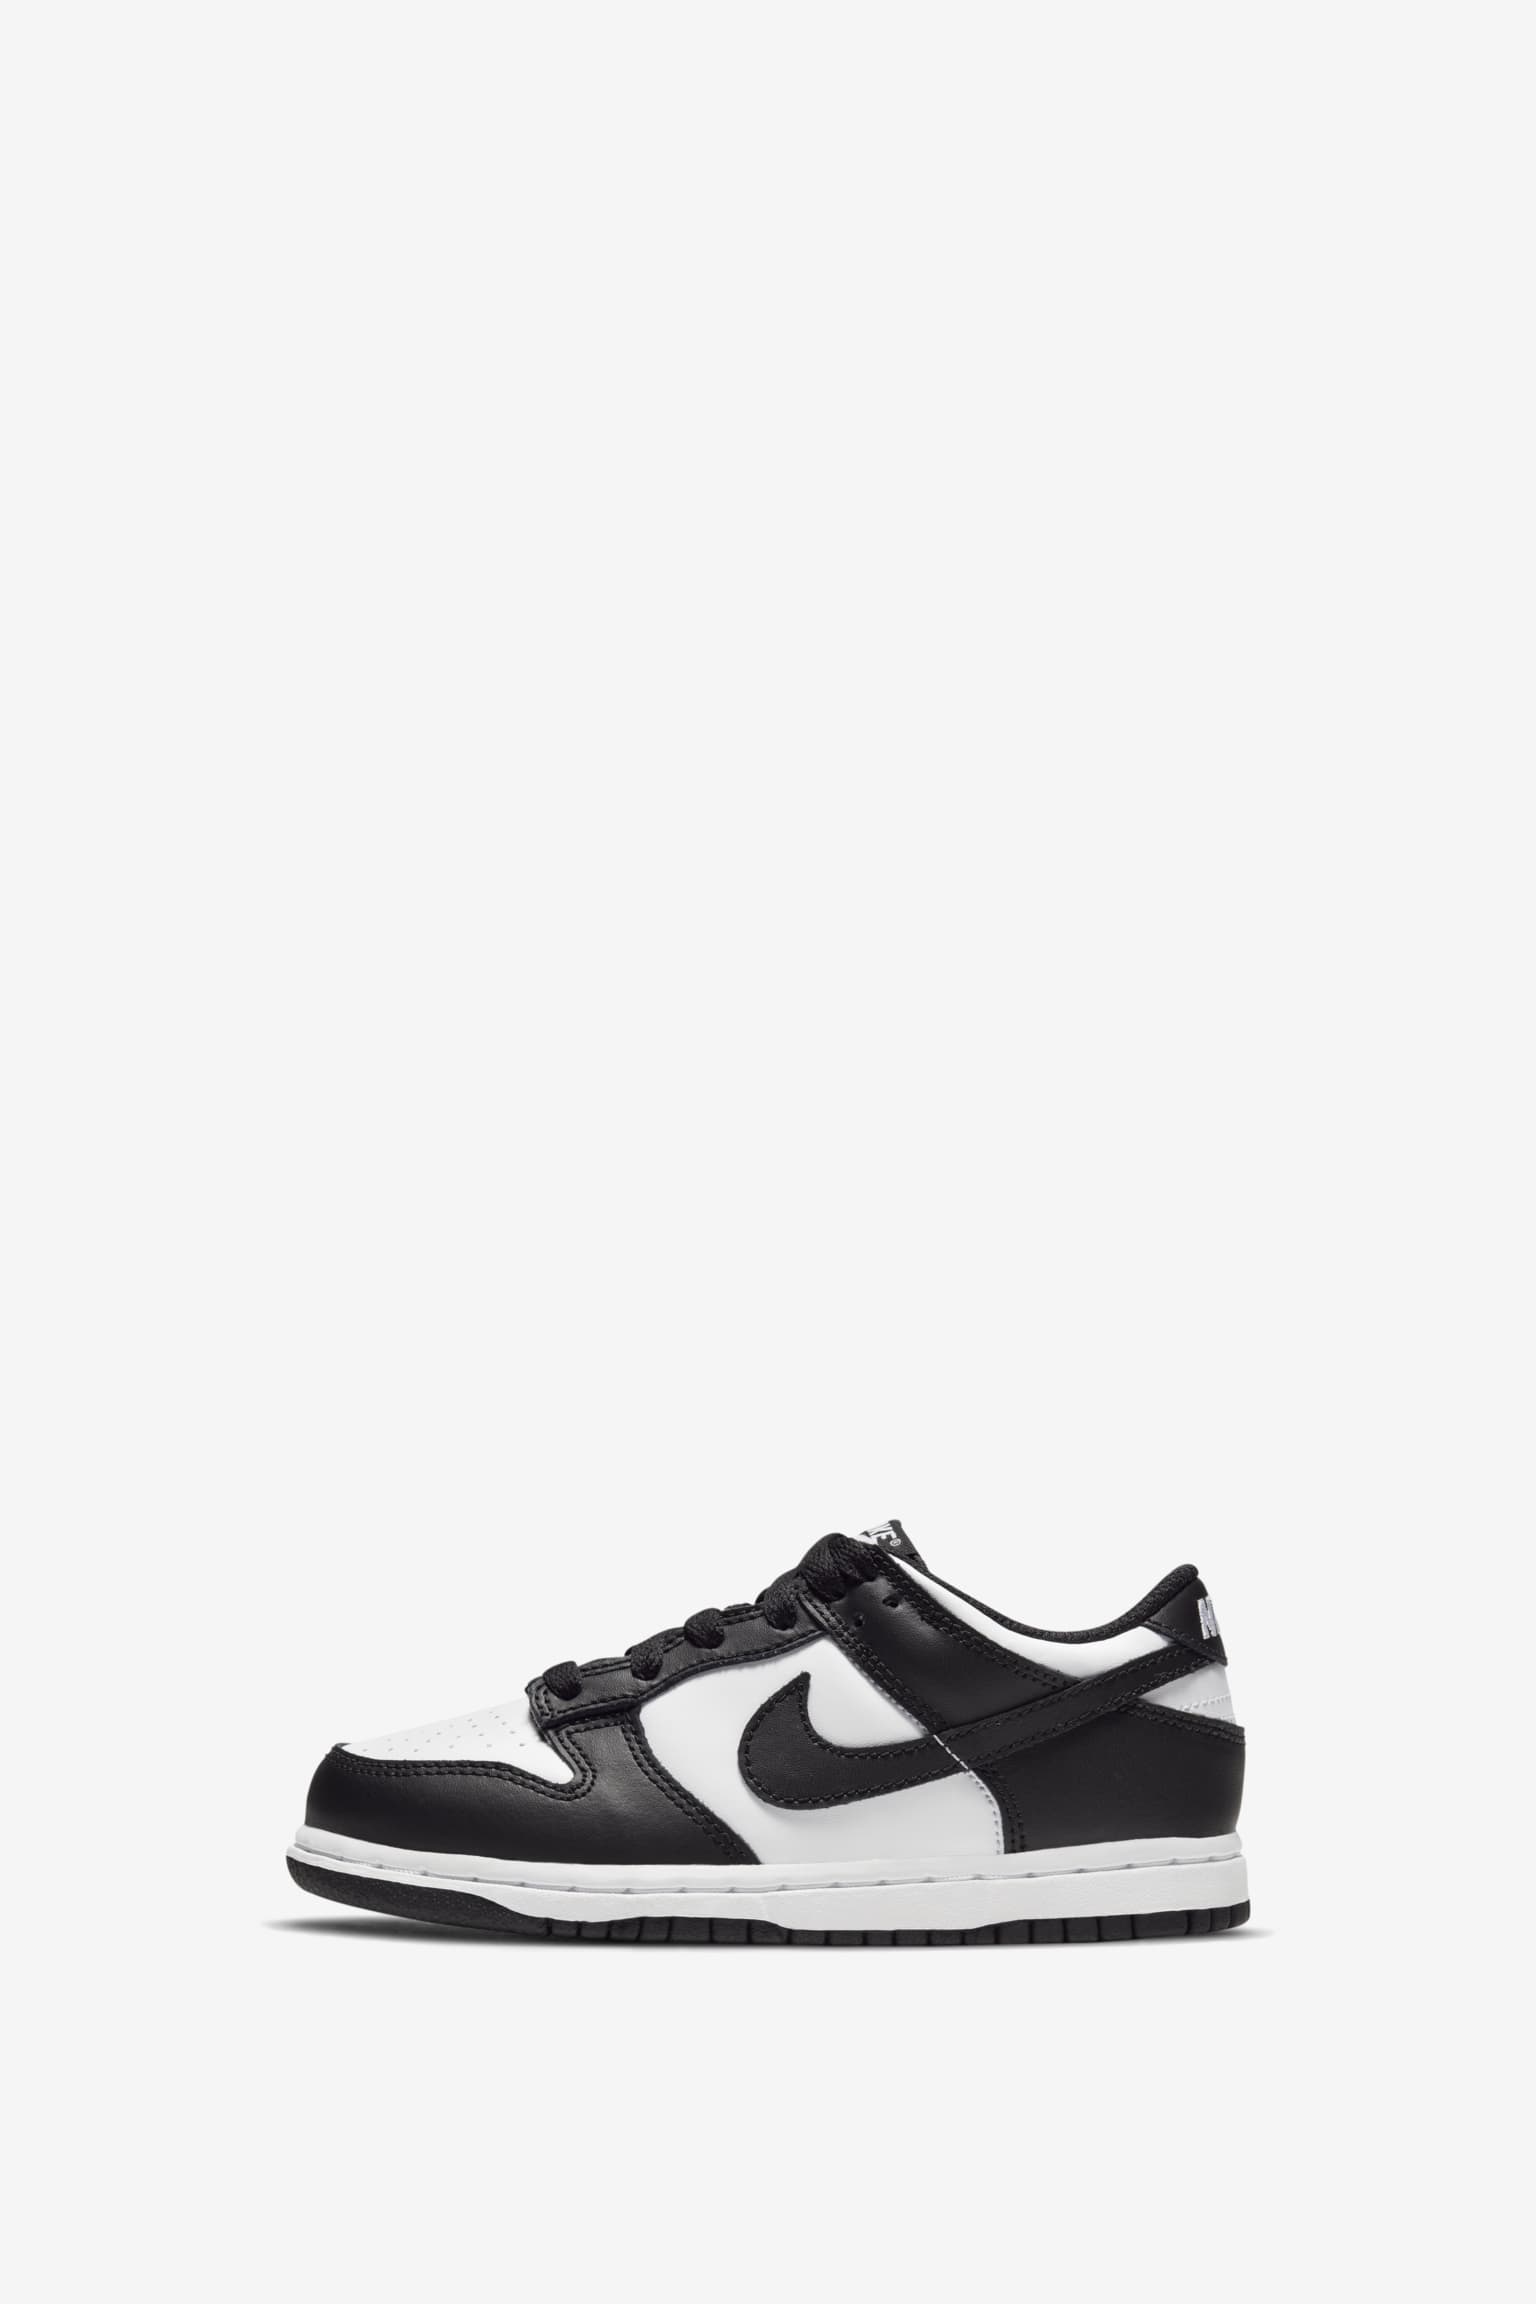 NIKE公式ダンク LOW 'Black' DD1391-100 / DUNK LOW. Nike SNKRS JP